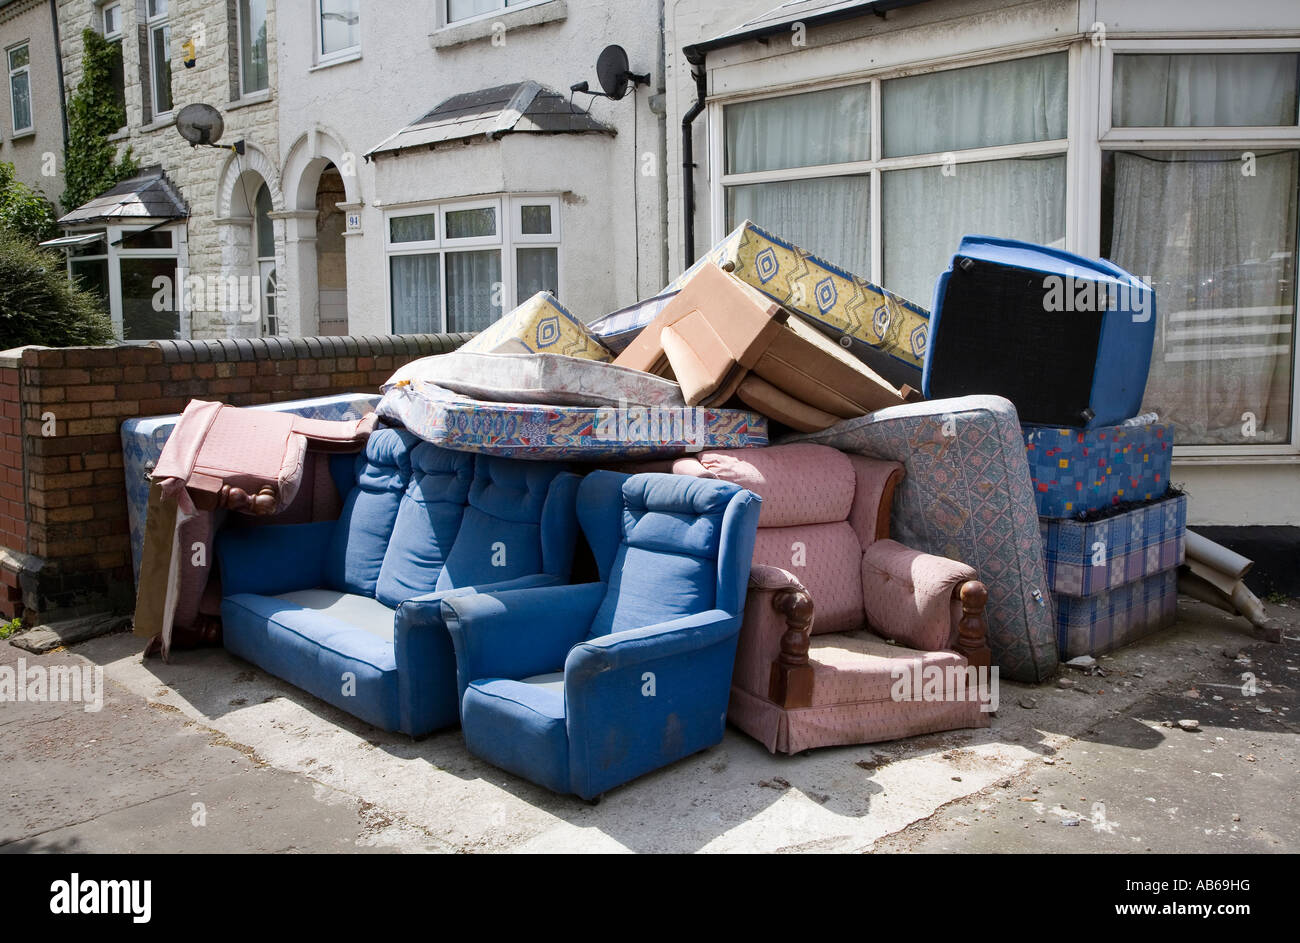 Furniture from house clearance left outdoors on street corner Cardiff Wales UK Stock Photo